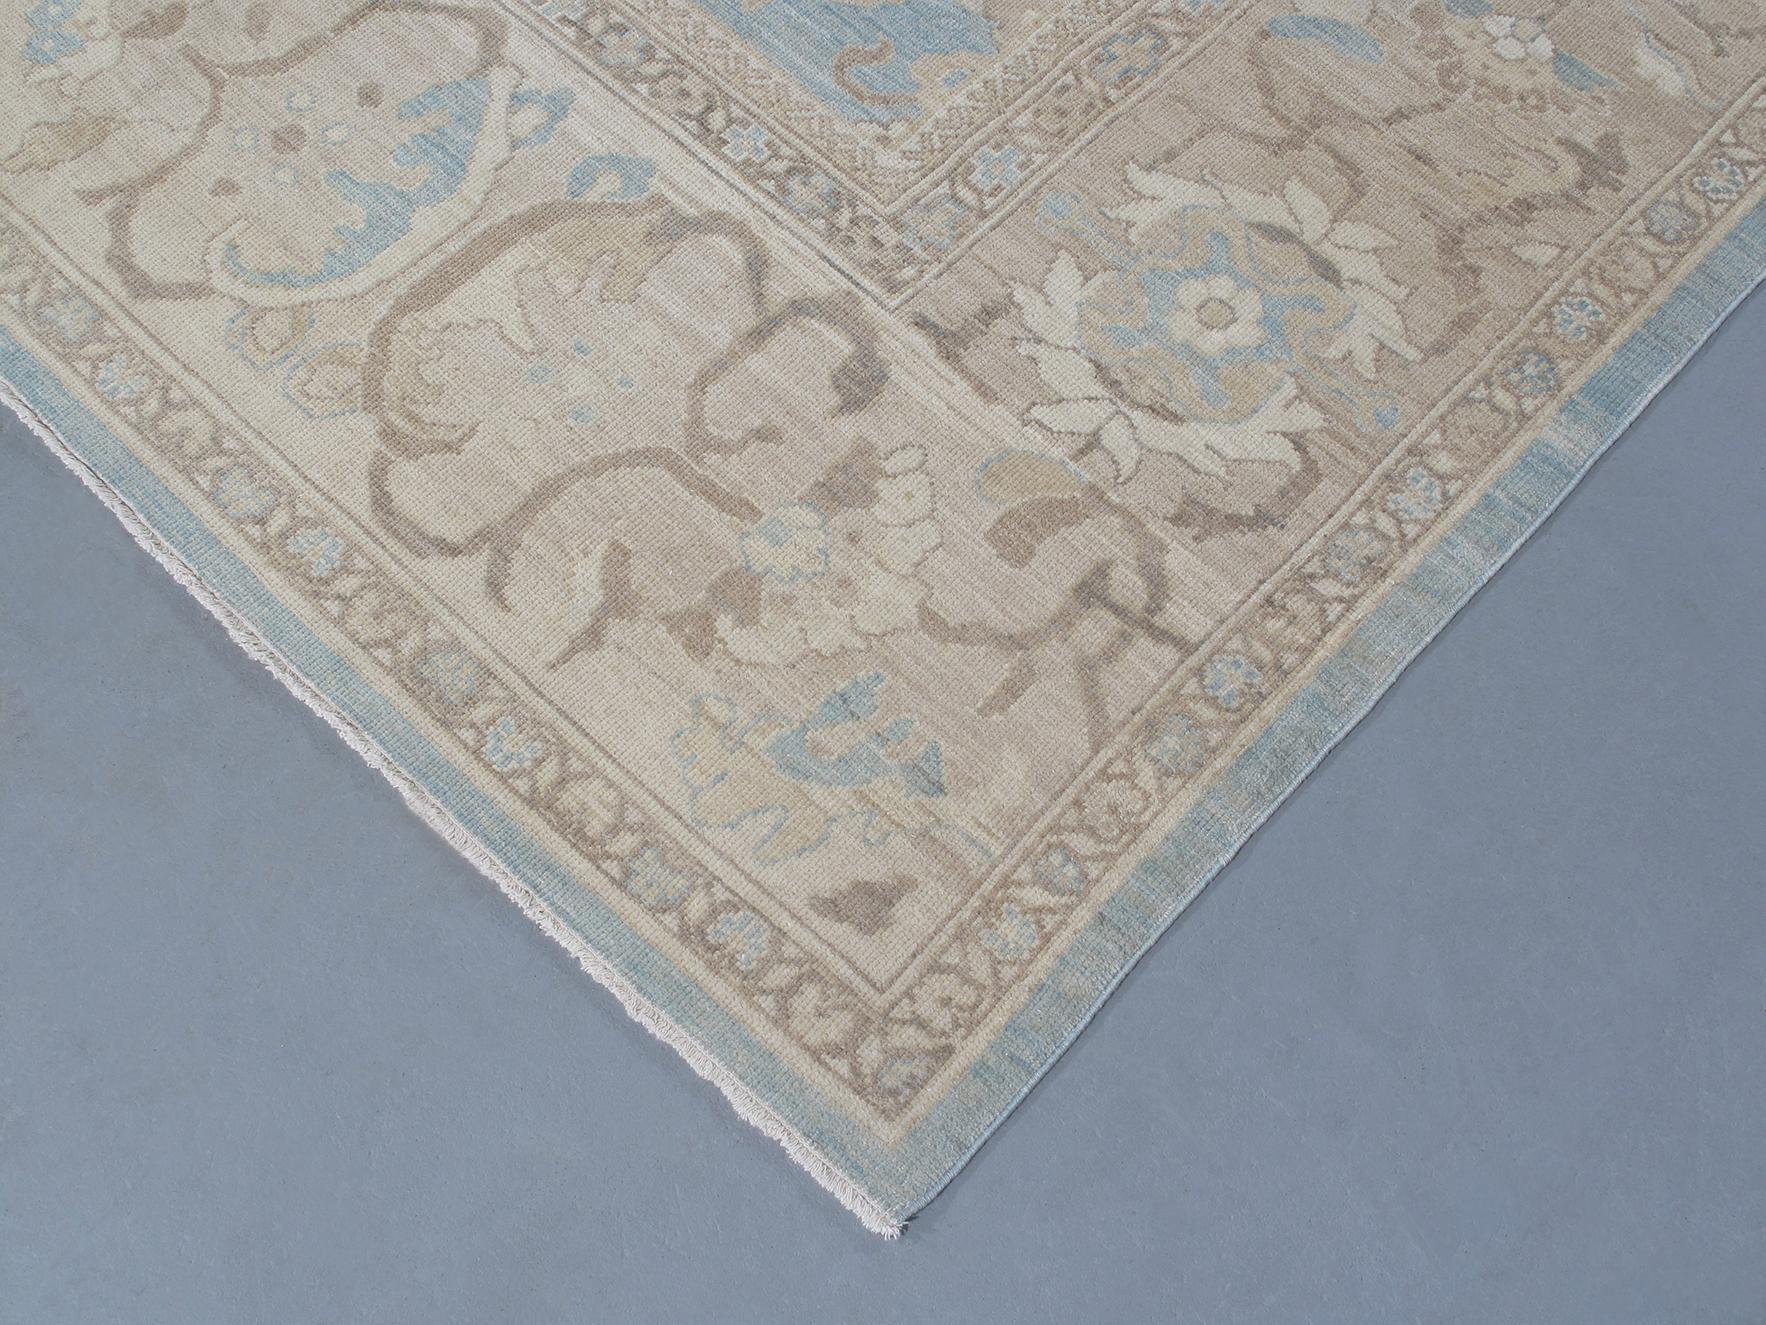 Contemporary Original Persian Ziegler Sultanabad Rug in Pale Blue and Beige For Sale